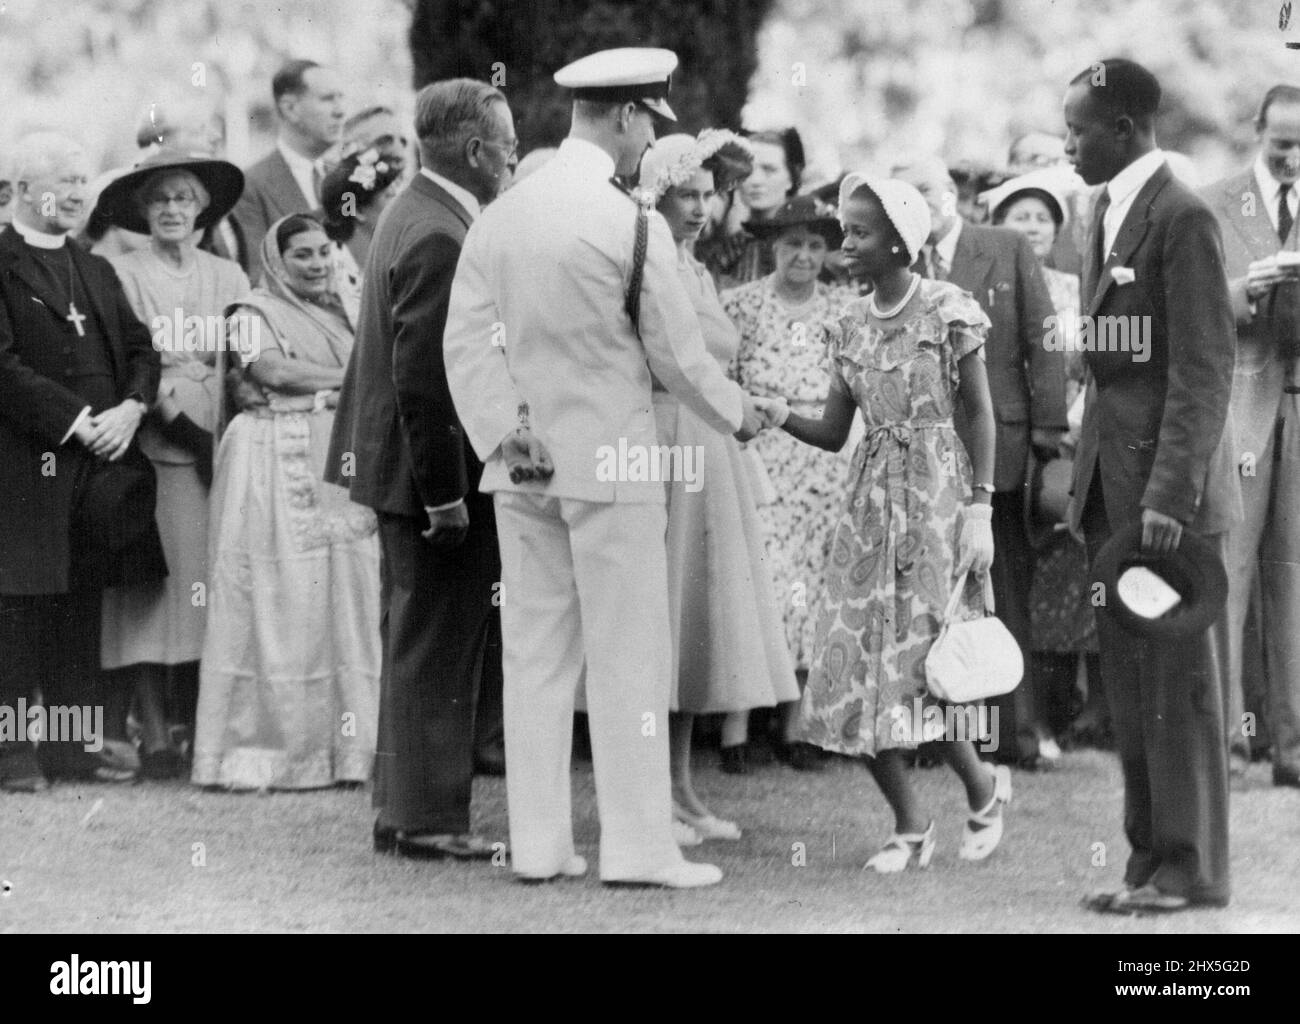 Princess In Nairobi -- Mrs. Nyanjom wife of Mr. ***** Nyanjom, Senior Co-Operative Inspector, being introduced ***** Princess Elizabeth during the Garden Party at Government House, Nairobi, one of the highlights of their Royal Highnesses visits to Kenya. April 02, 1952. Stock Photo